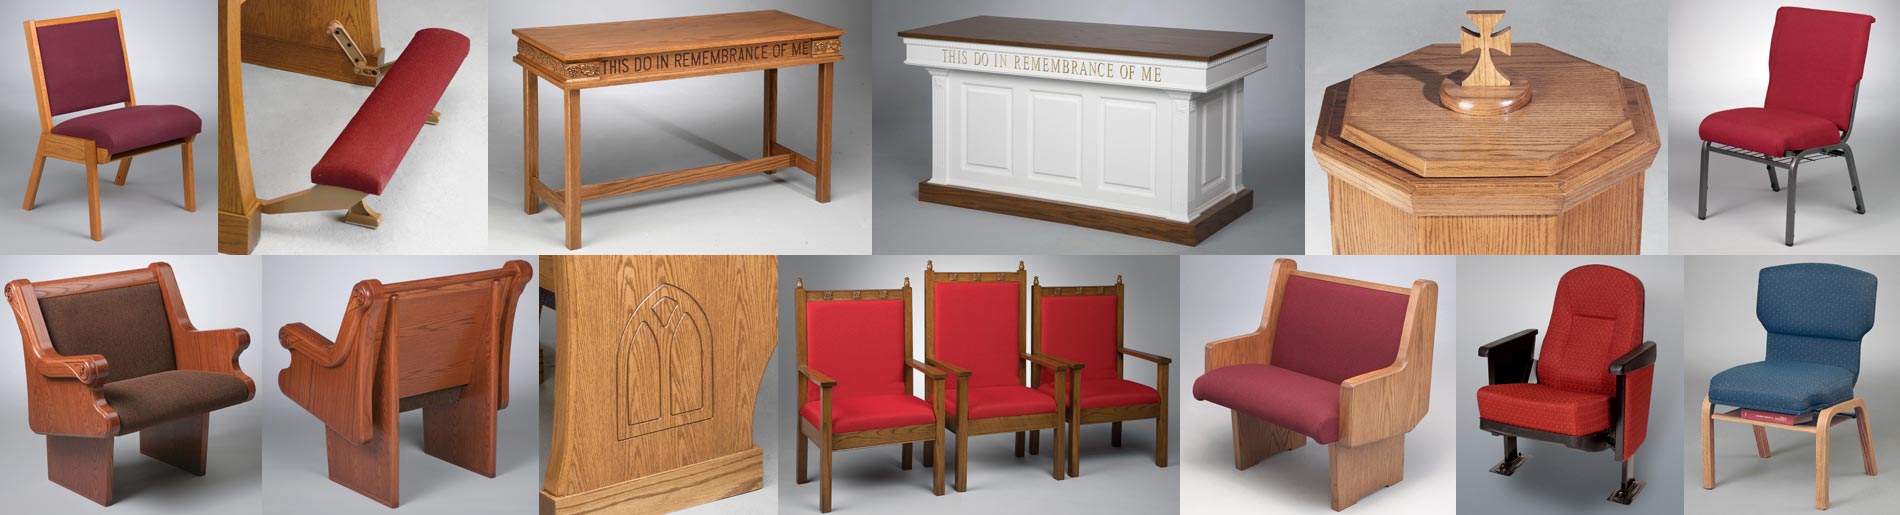 Church Pews And Furniture By Imperial Woodworks Inc